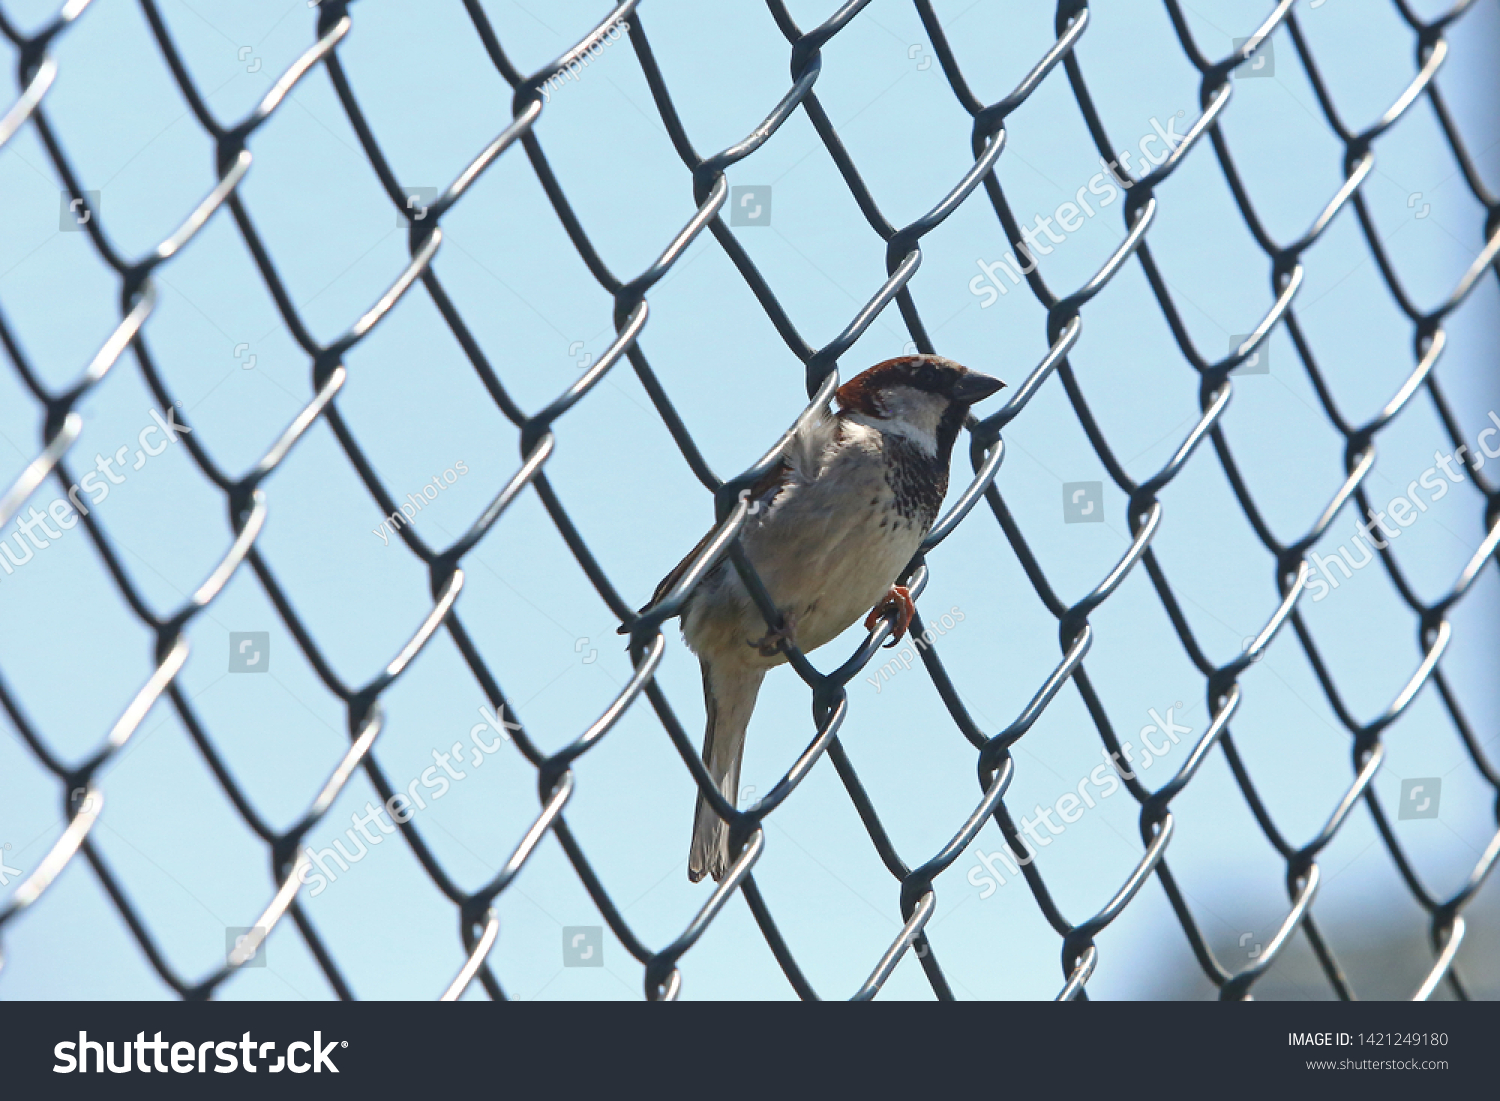 Sparrow is the name given to non-migratory, conic-billed bird species that form the Passeridae family, living in close proximity to humans. #1421249180